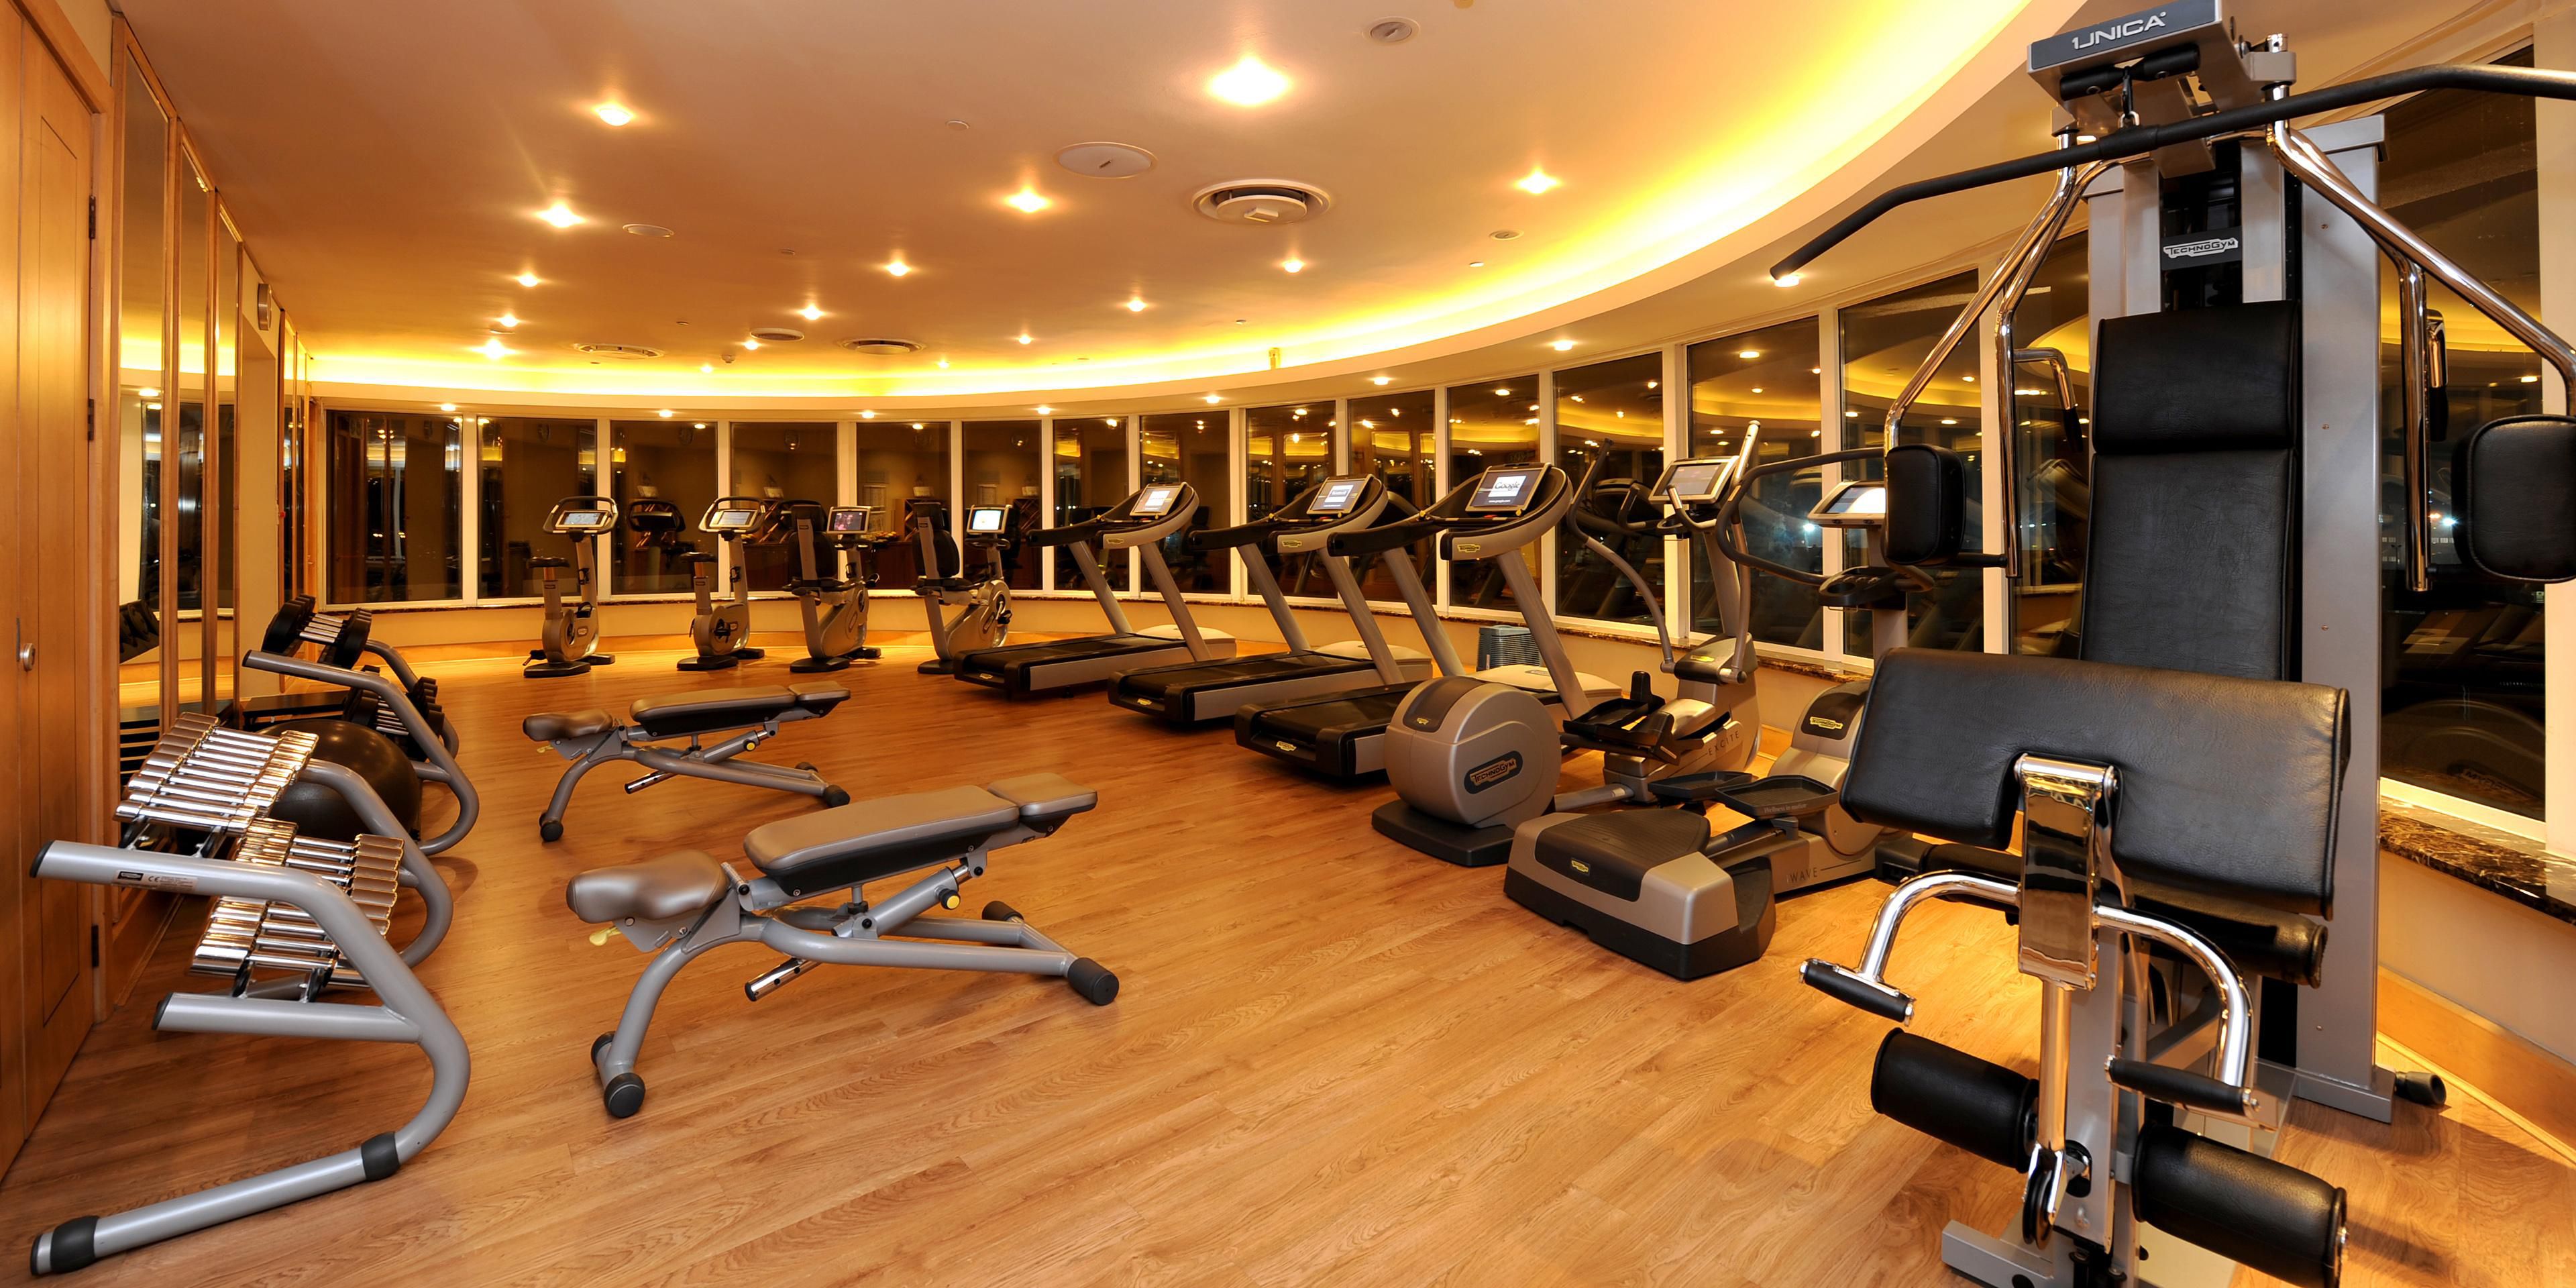 The equipment includes modern Technogym machines. 
 The environment is temperature controlled and features full length mirrors, chilled water, gym-towels and large screen TVs. Located on the top floor of the hotel next to the Spa and heated pool, the gym is the perfect place to work out before or after a flight.